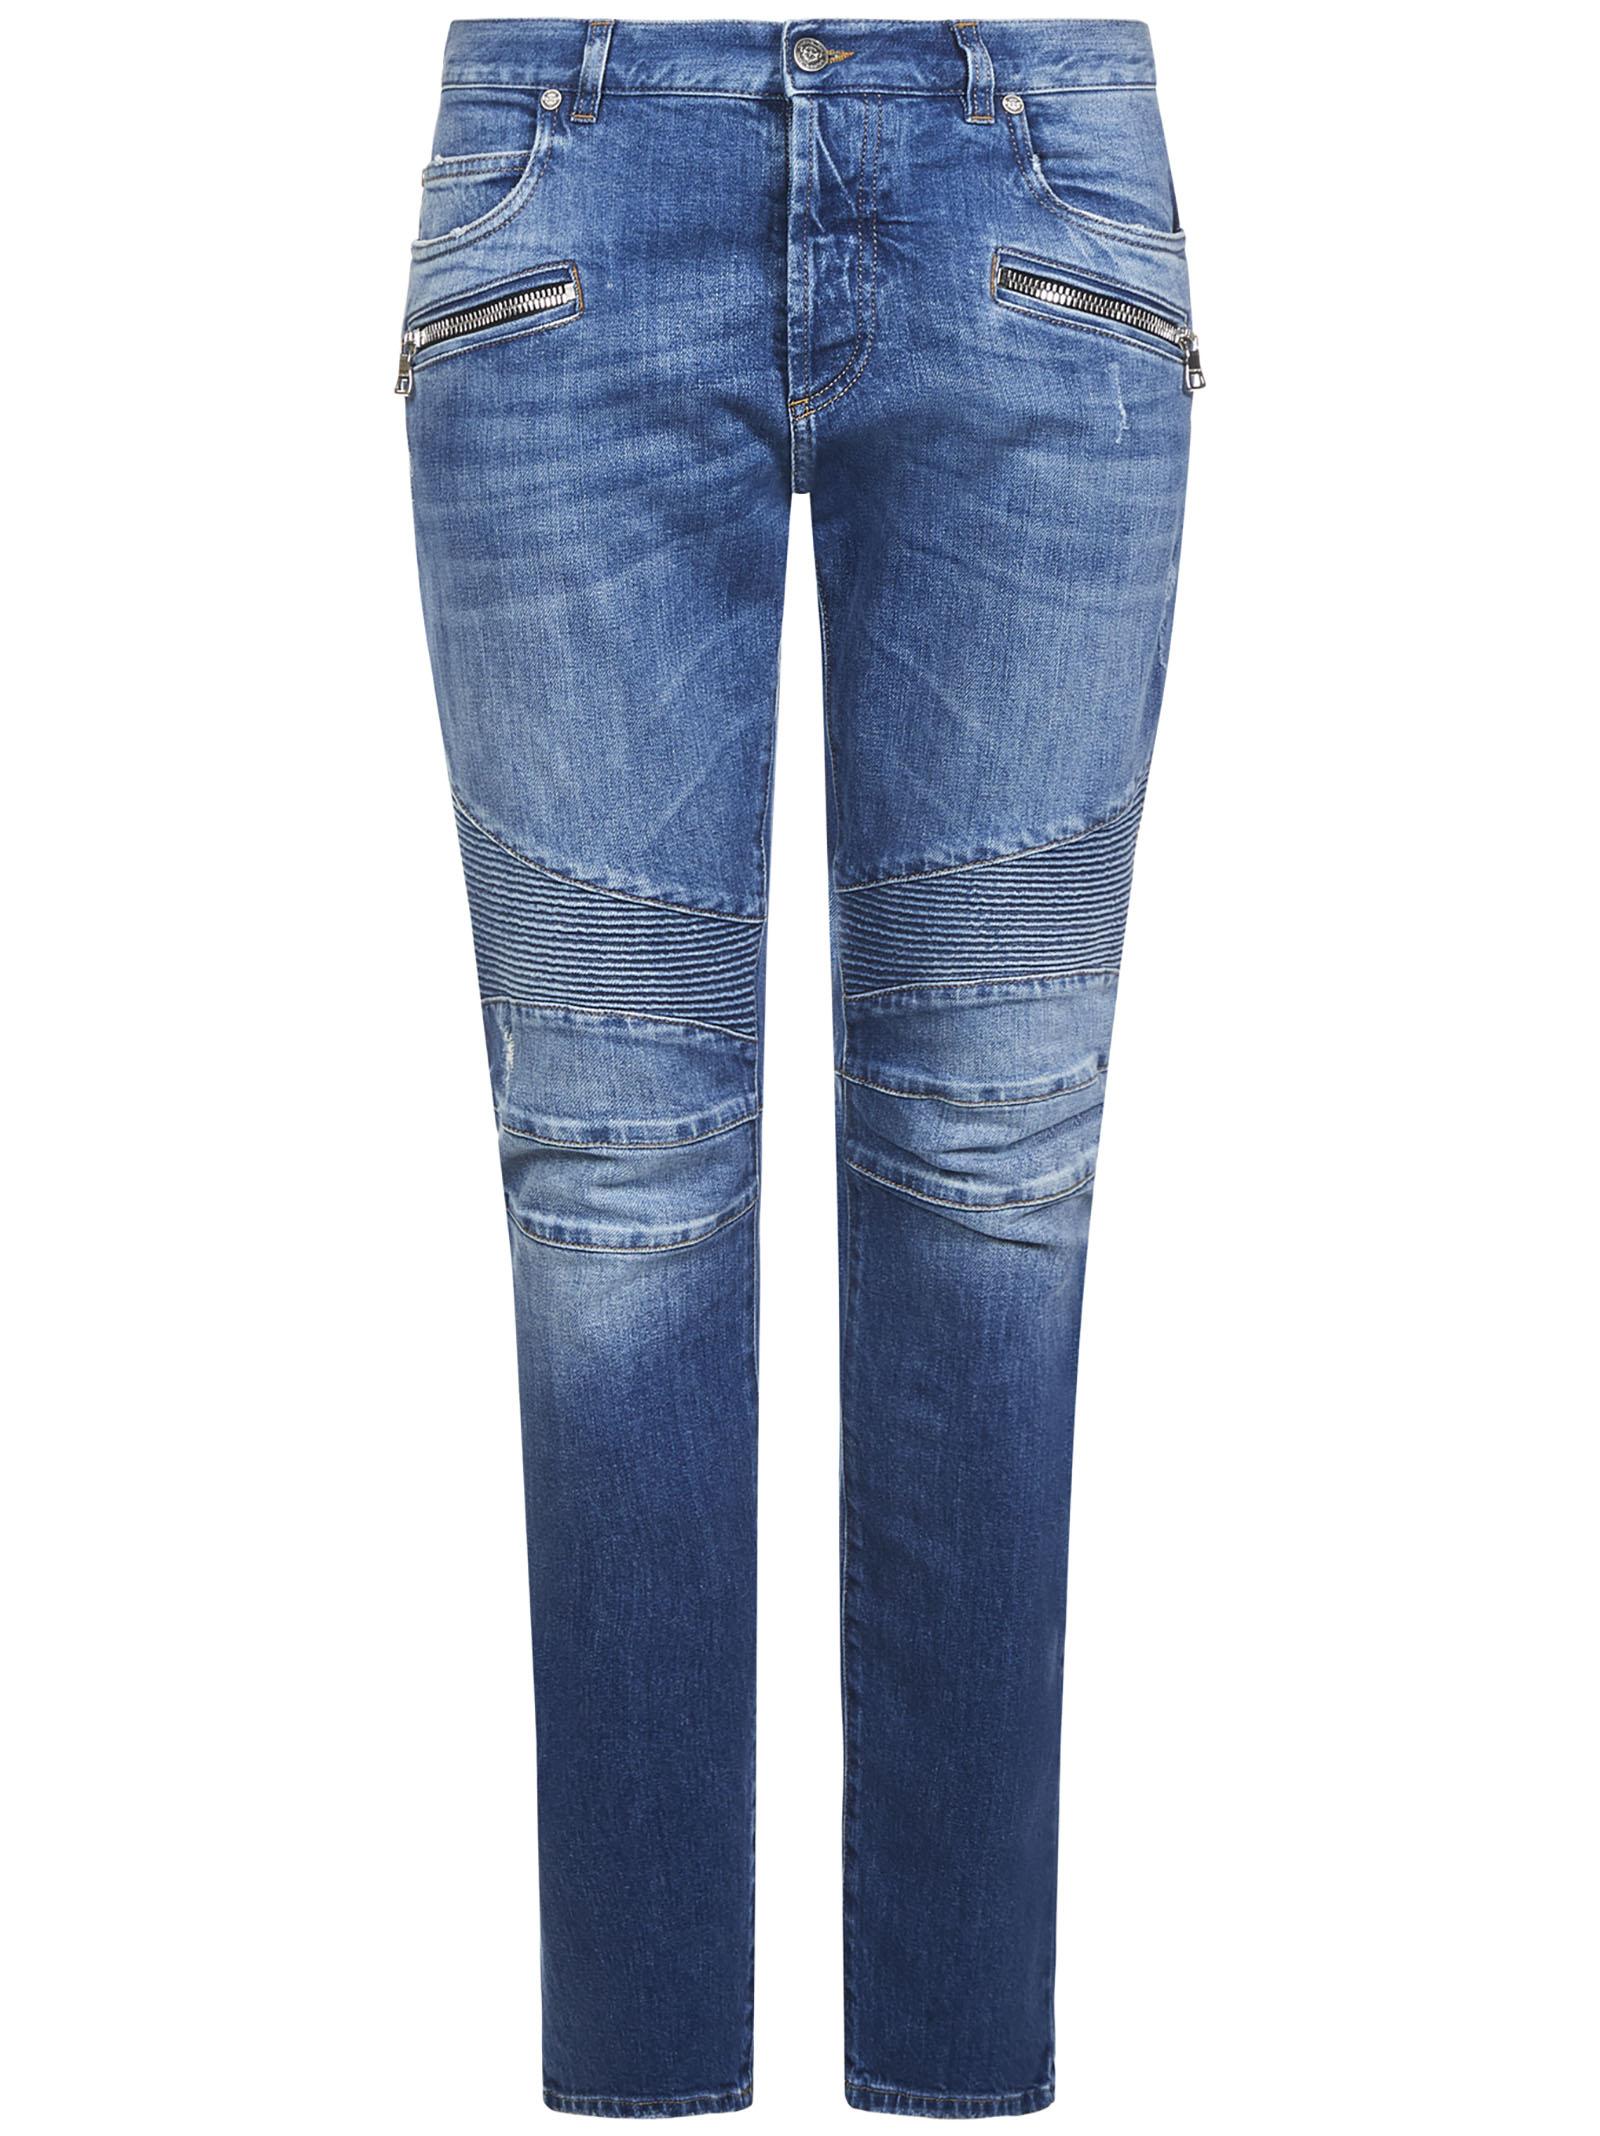 Balmain Denim Distressed Jeans in Blue for Men Save 45% Mens Clothing Jeans Tapered jeans 